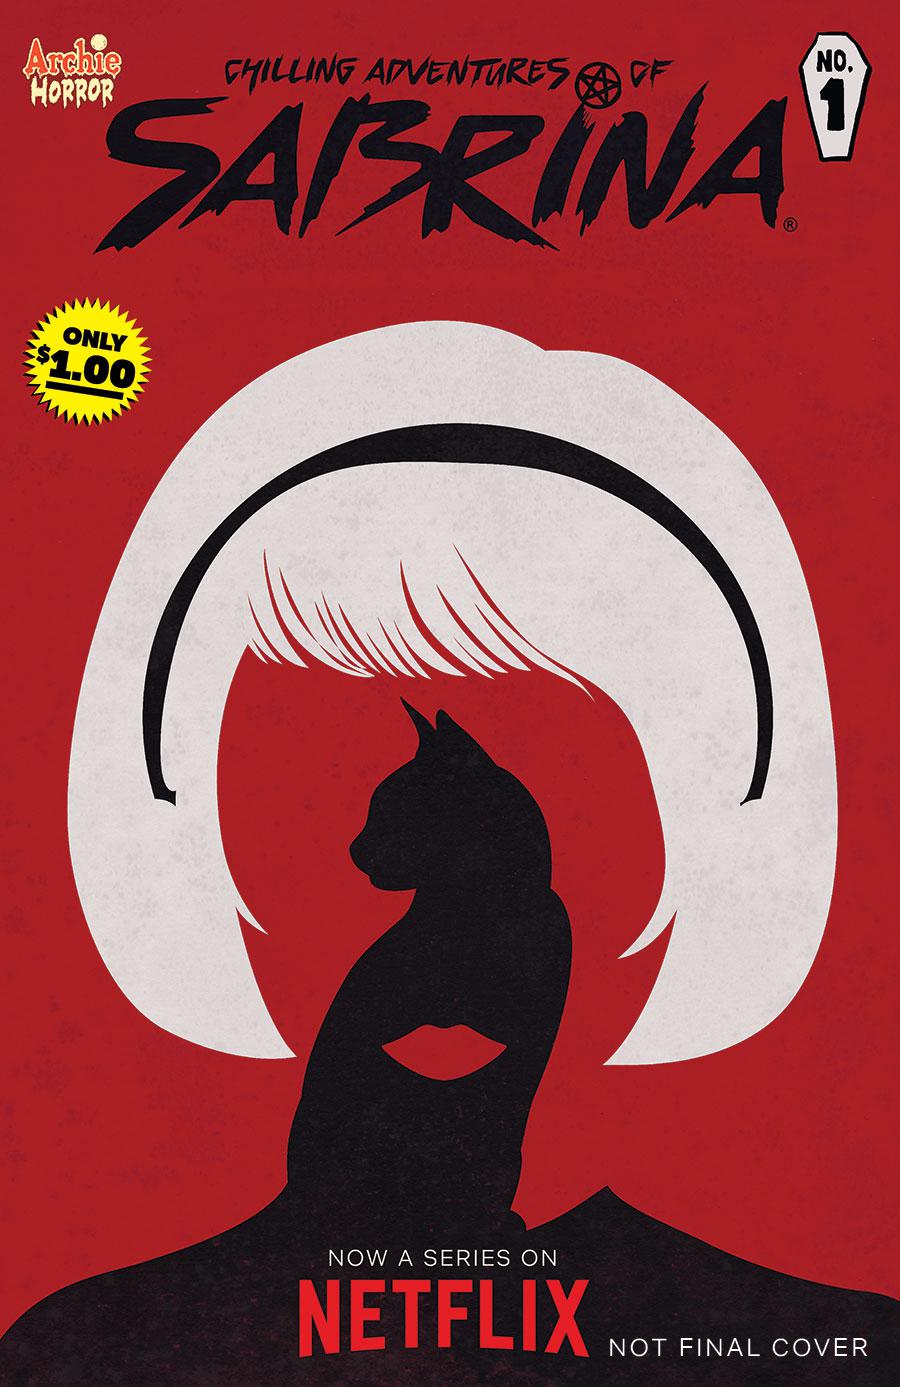 Chilling Adventures Of Sabrina #1 Cover F Reprint